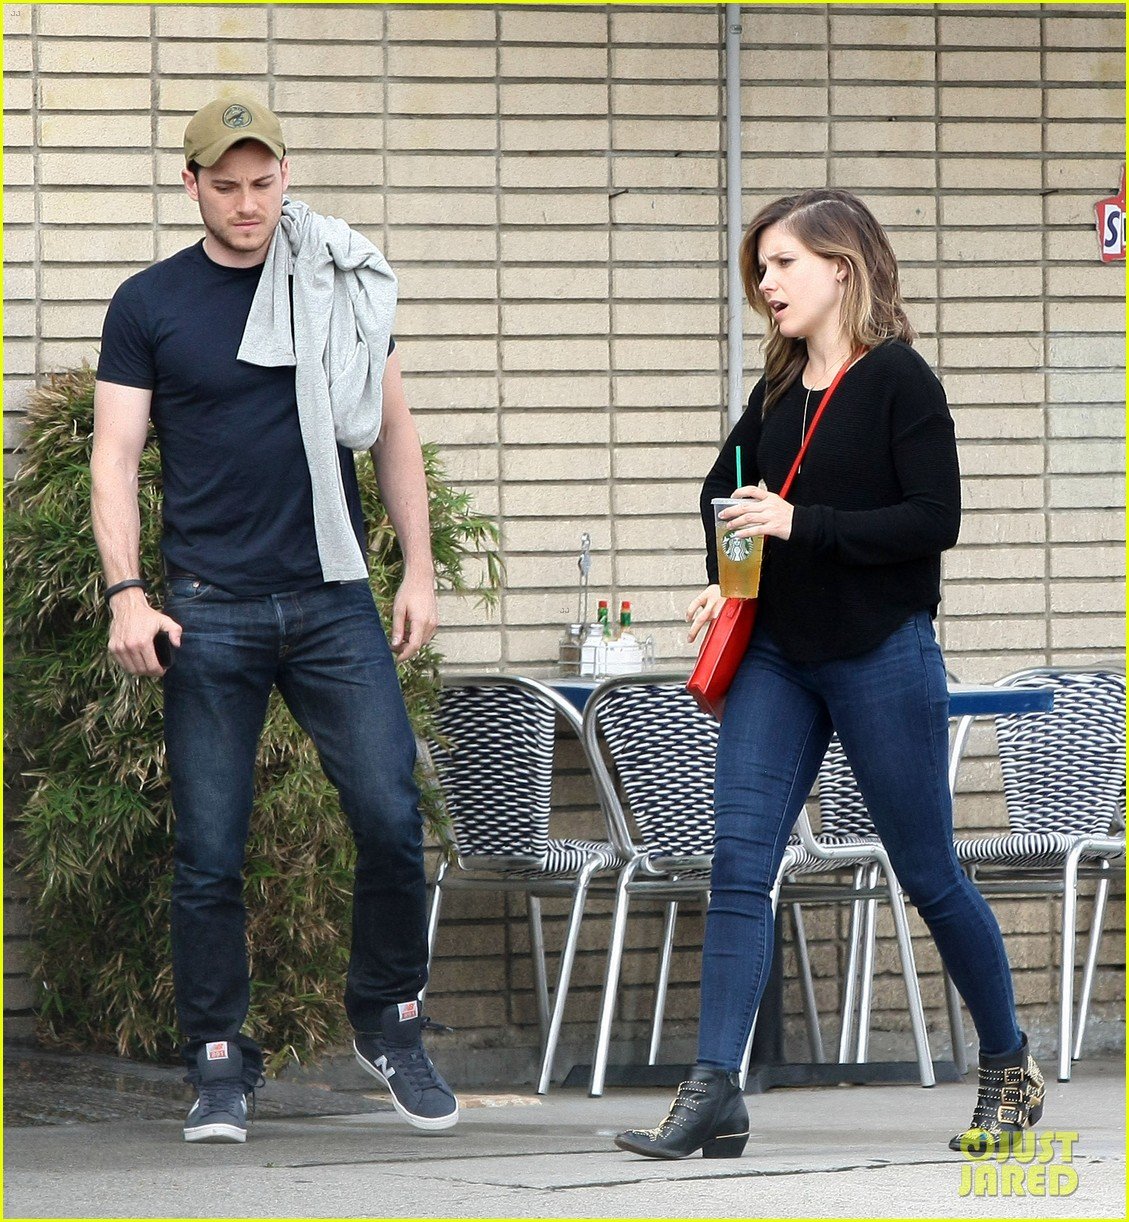 Sophia Bush Dines with Co-Star Jesse Lee Soffer Before New 'Chicago .'  Episode Airing: Photo 3108189 | Jesse Lee Soffer, Sophia Bush Photos | Just  Jared: Entertainment News